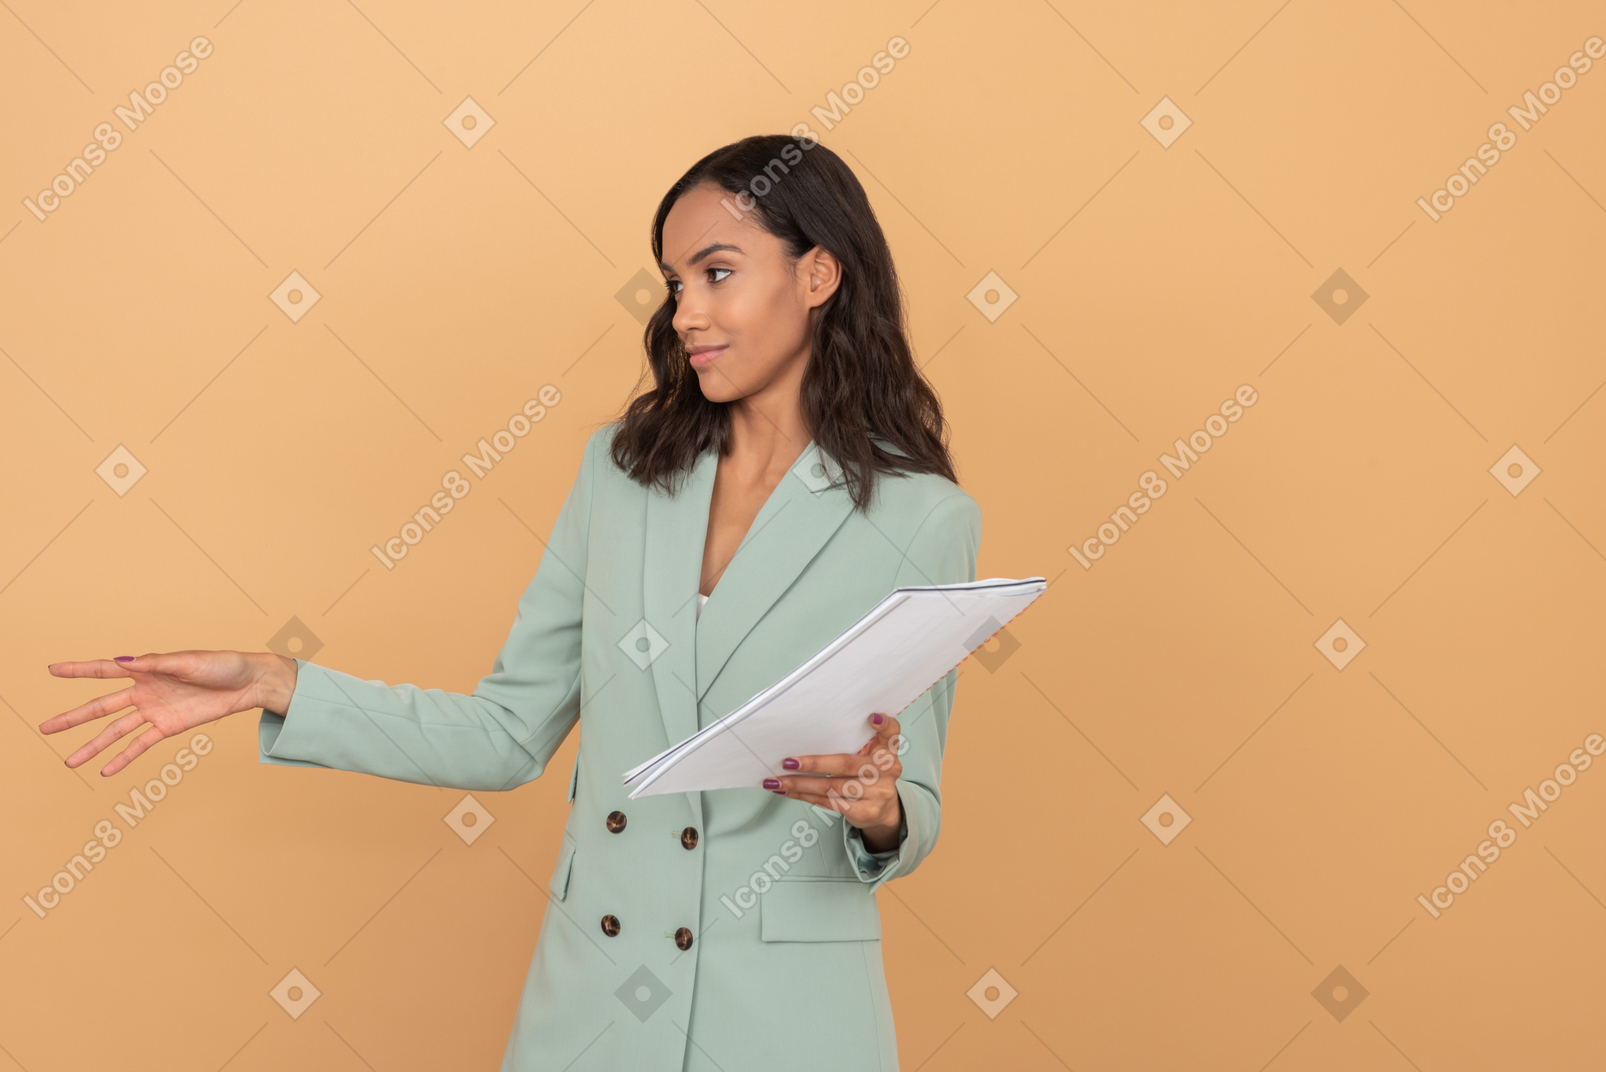 Astonished young woman holding a bunch of papers